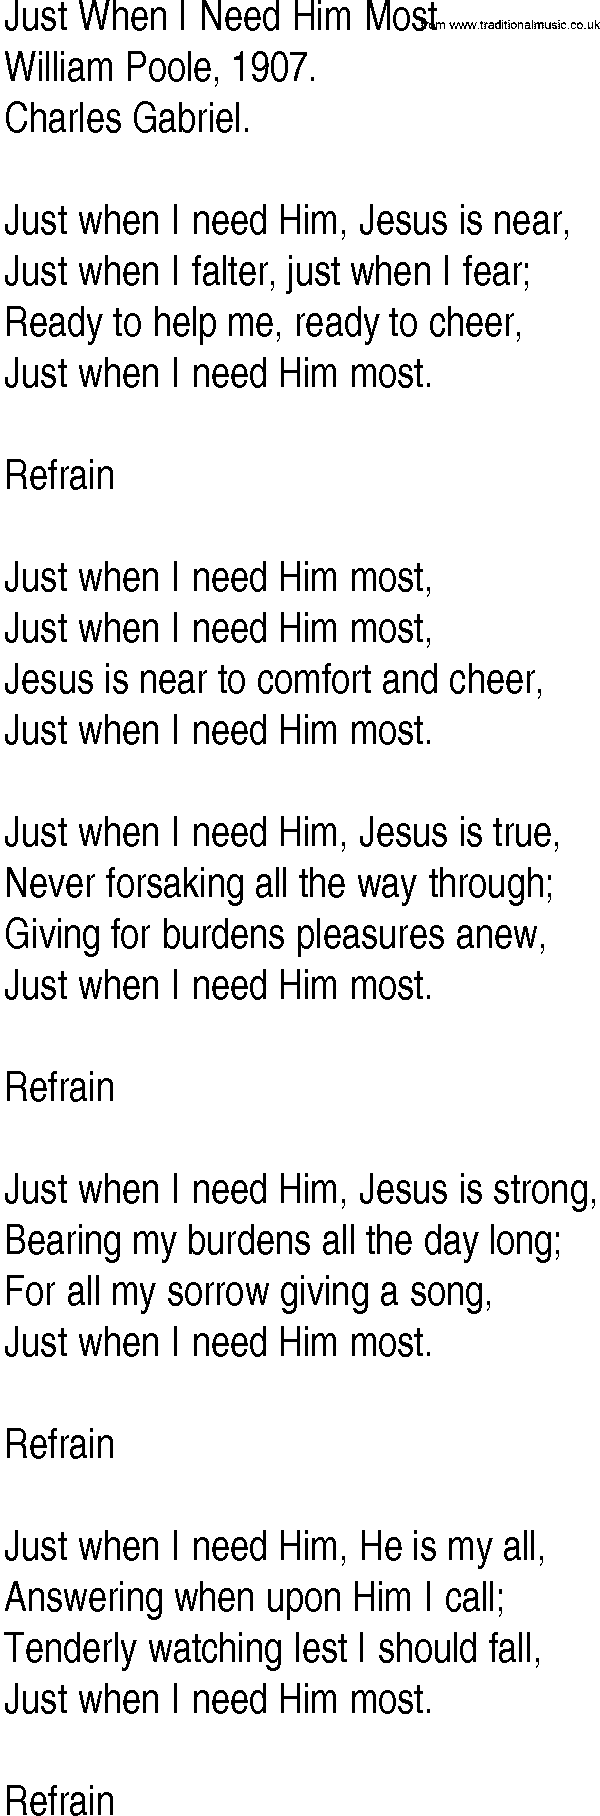 Hymn and Gospel Song: Just When I Need Him Most by William Poole lyrics